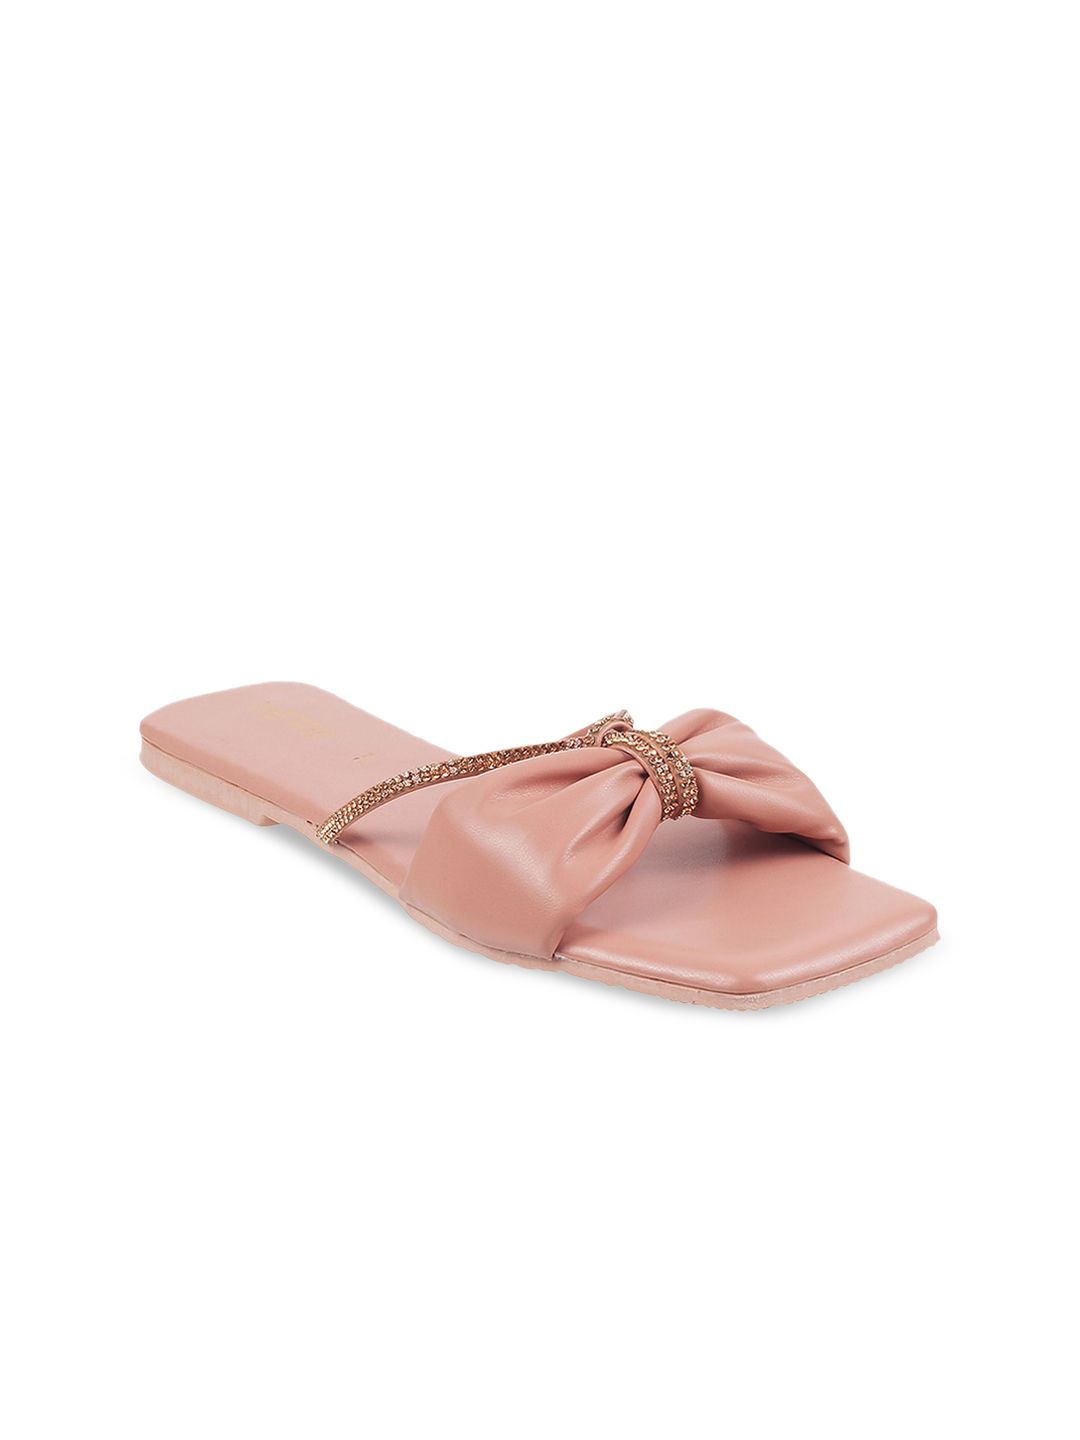 Metro Women Peach-Coloured Embellished Open Toe Flats Price in India